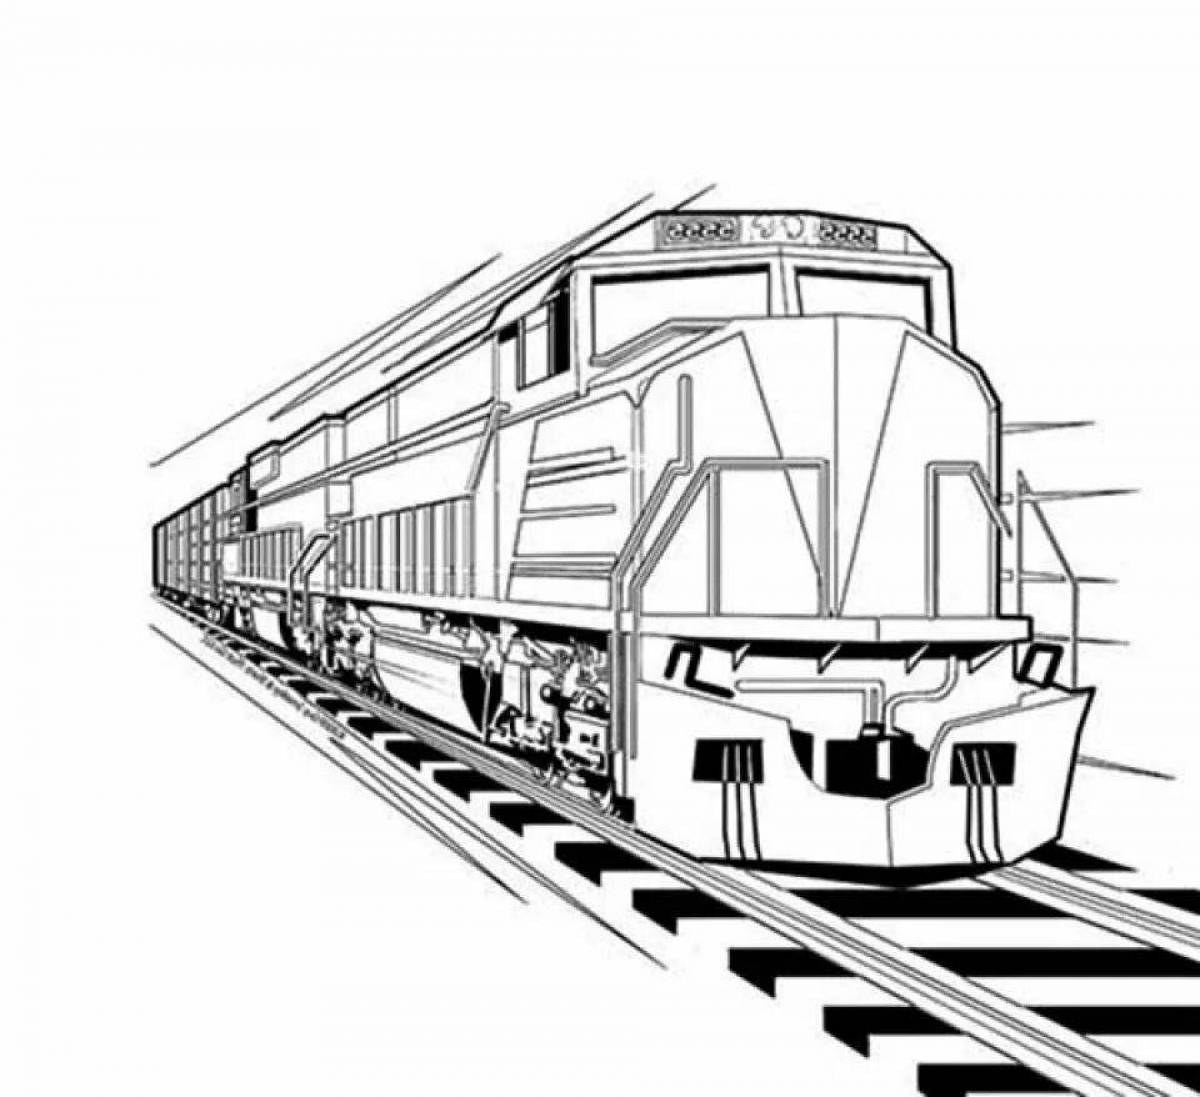 Outstanding freight train coloring book for kids